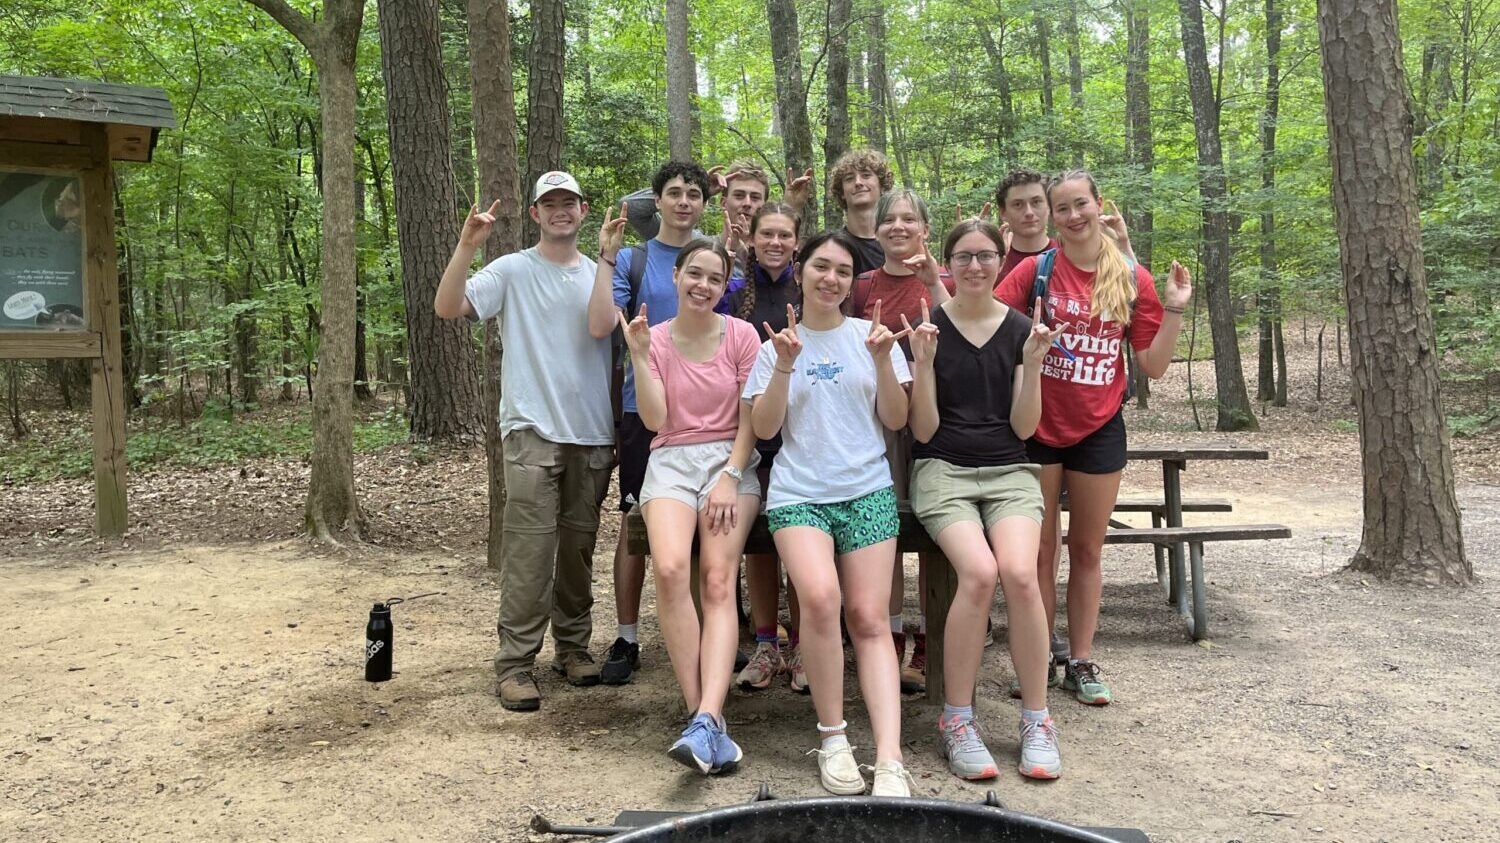 Incoming University Honors Program students in a group photo in a wooded area.